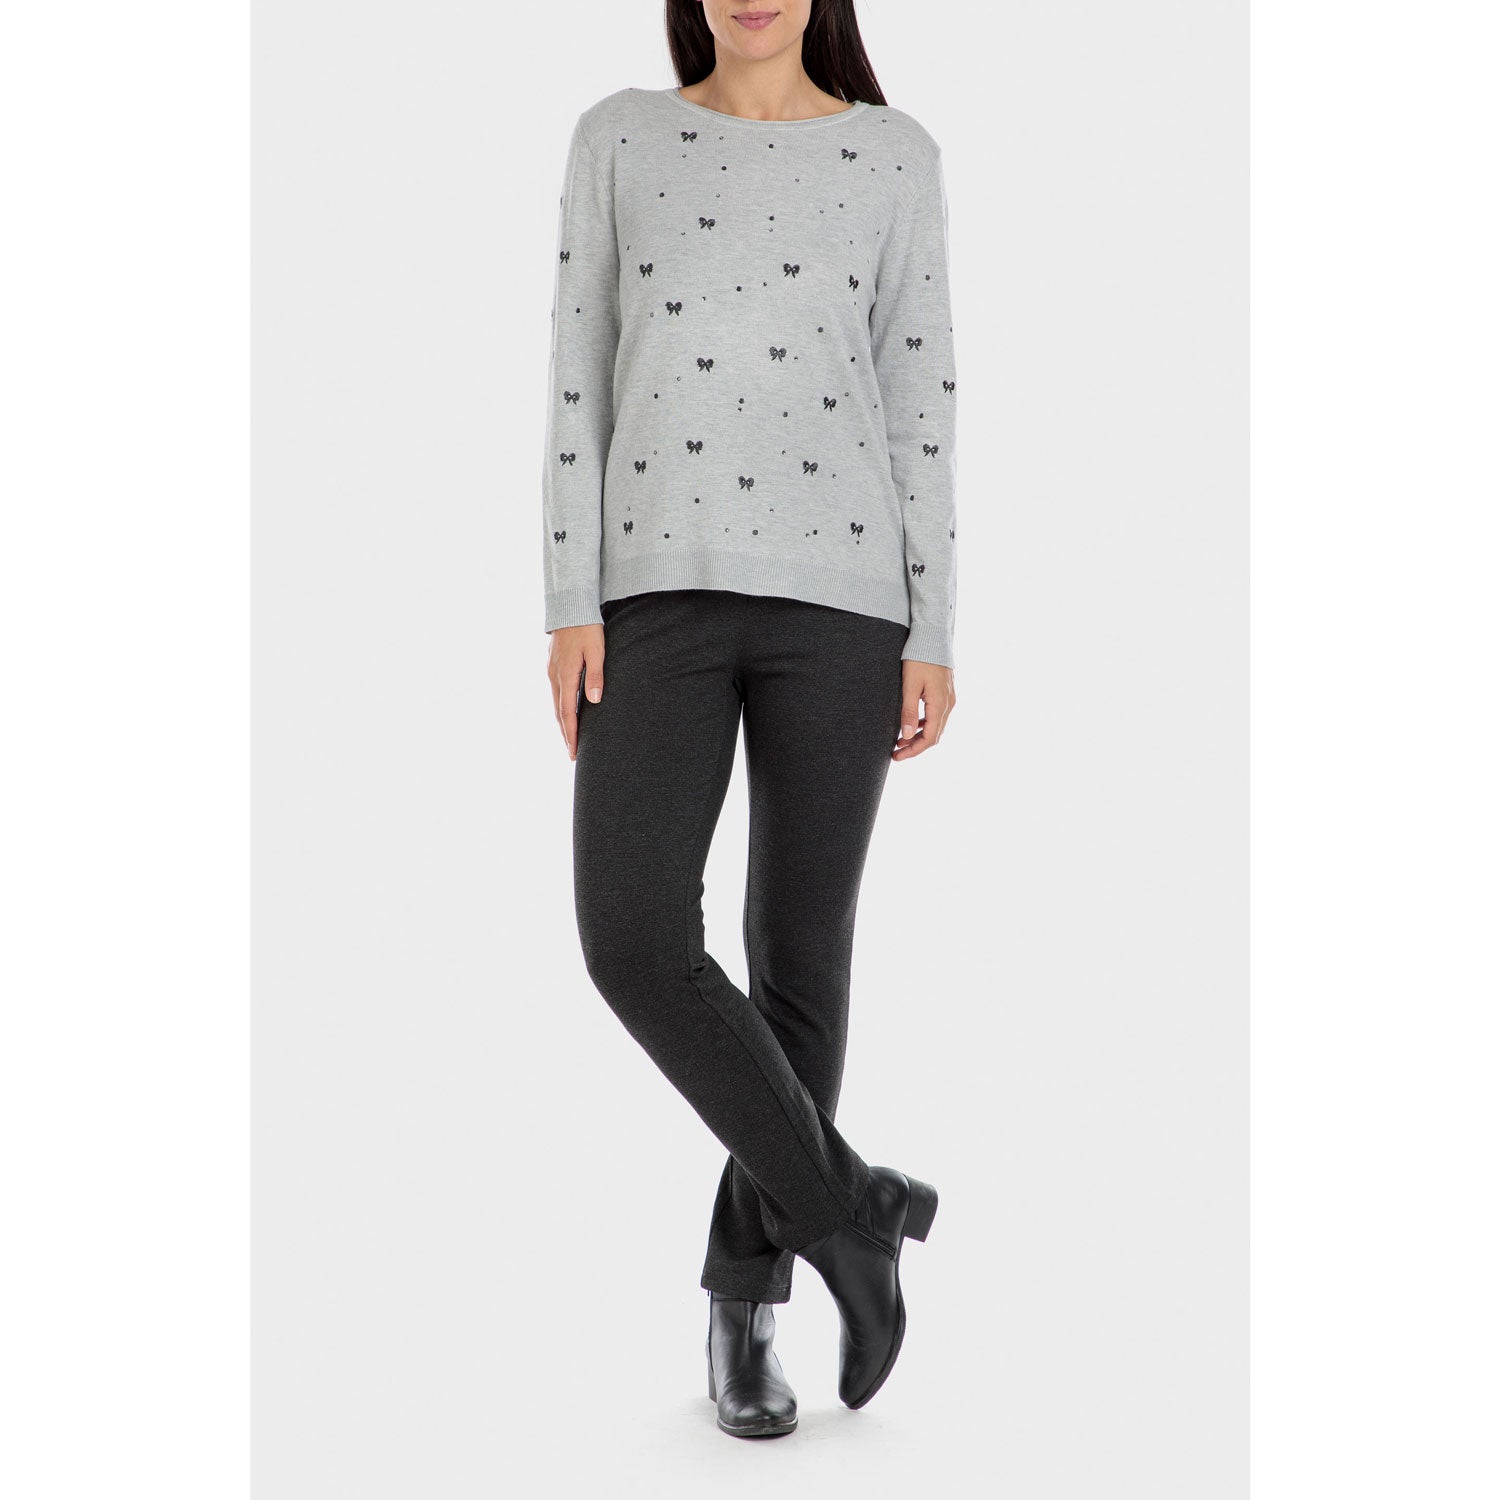 Punt Roma Rhinestone Embroidered Sweater - Grey 4 Shaws Department Stores